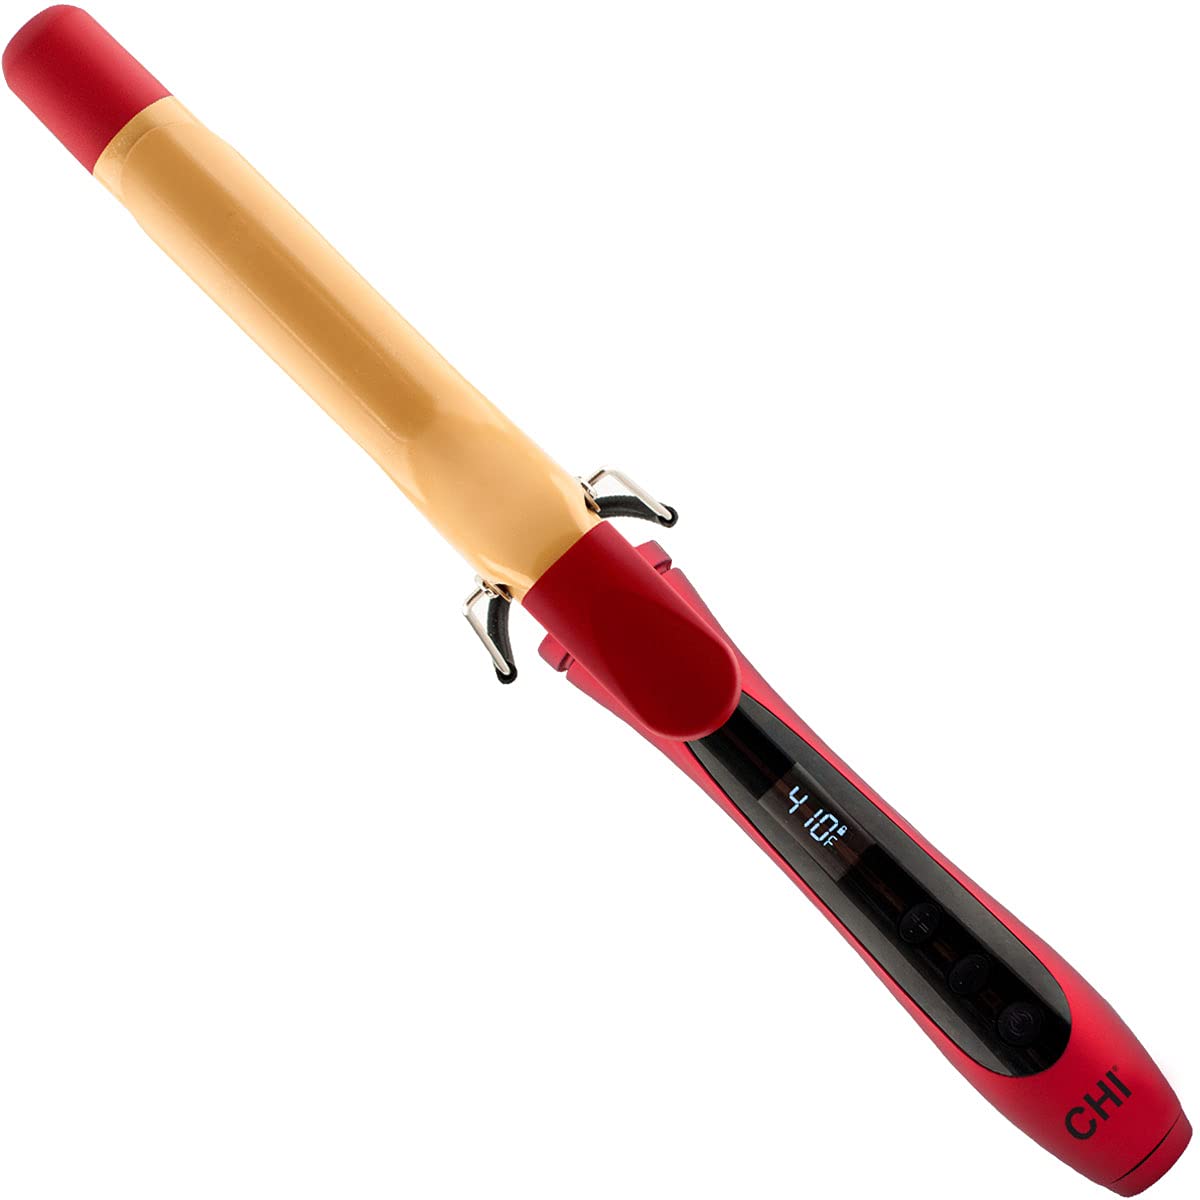 CHI Air Texture Fire Red Ceramic Curl Iron, Hair Curler For Smooth & Shiny Curls, Adjustable Temperature & Automatic Shut-Off, 1" Barrel